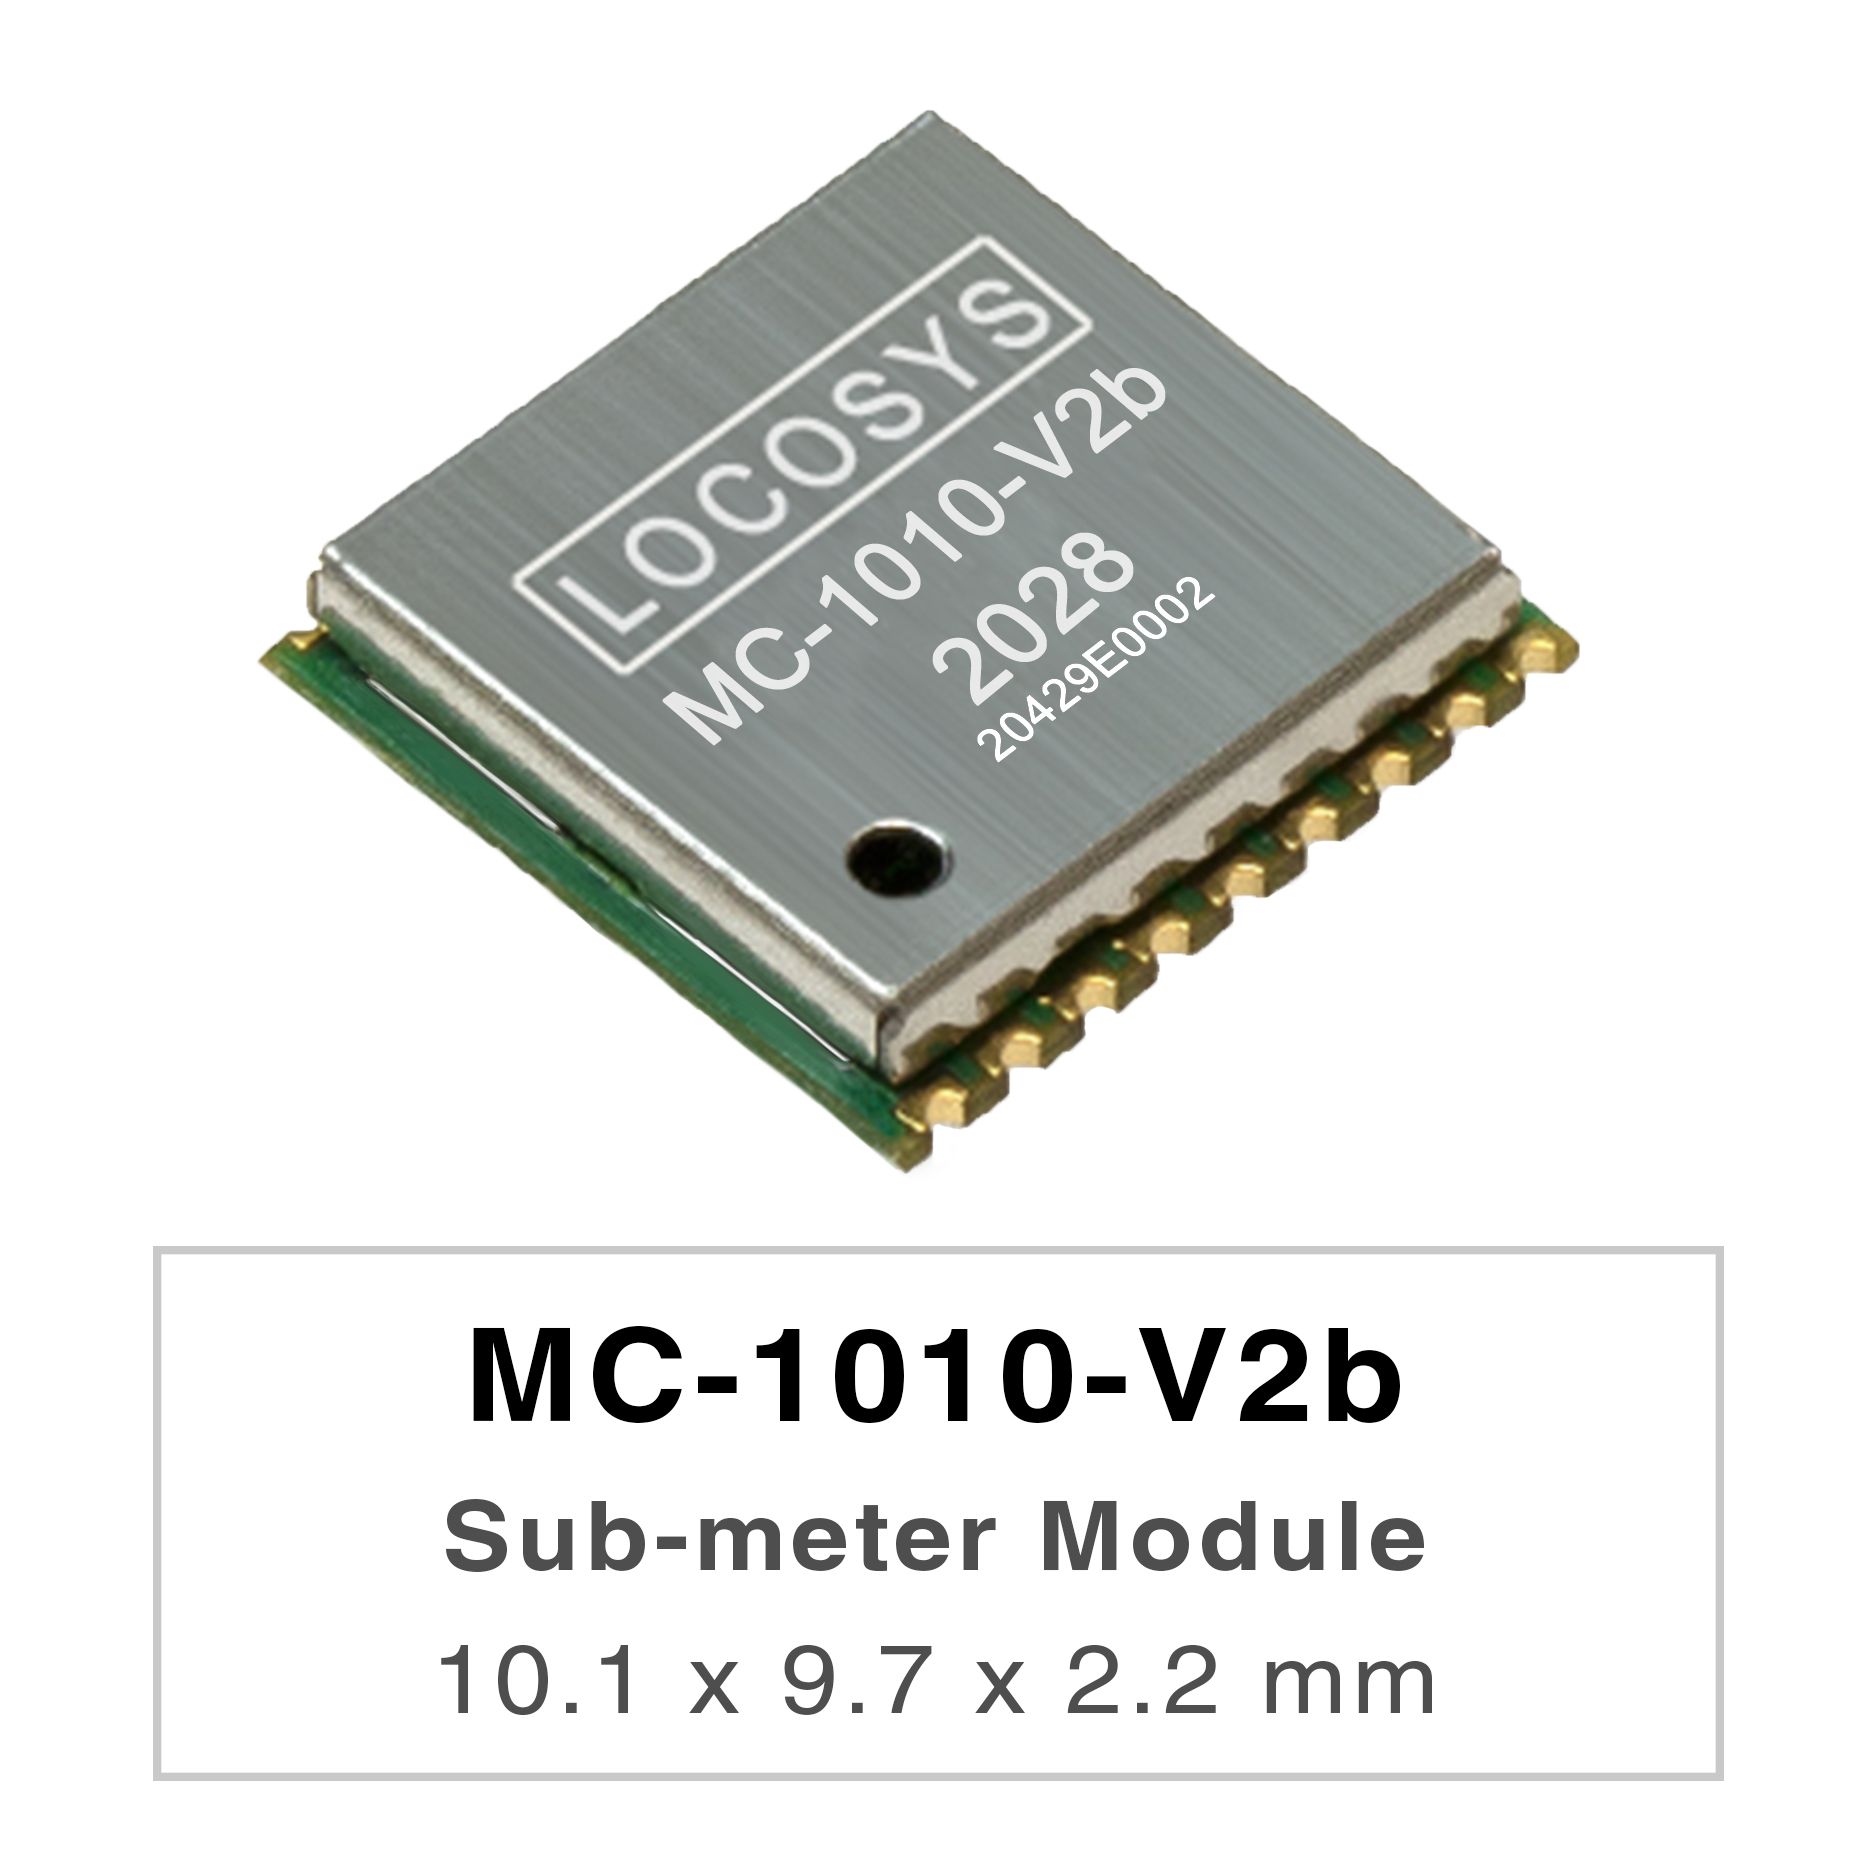 LOCOSYS MC-1010-Vxx series are high-performance dual-band GNSS positioning modules that are
capable of tracking all global civil navigation systems. They adopt 12 nm process and integrate efficient
power management architecture to perform low power and high sensitivity.